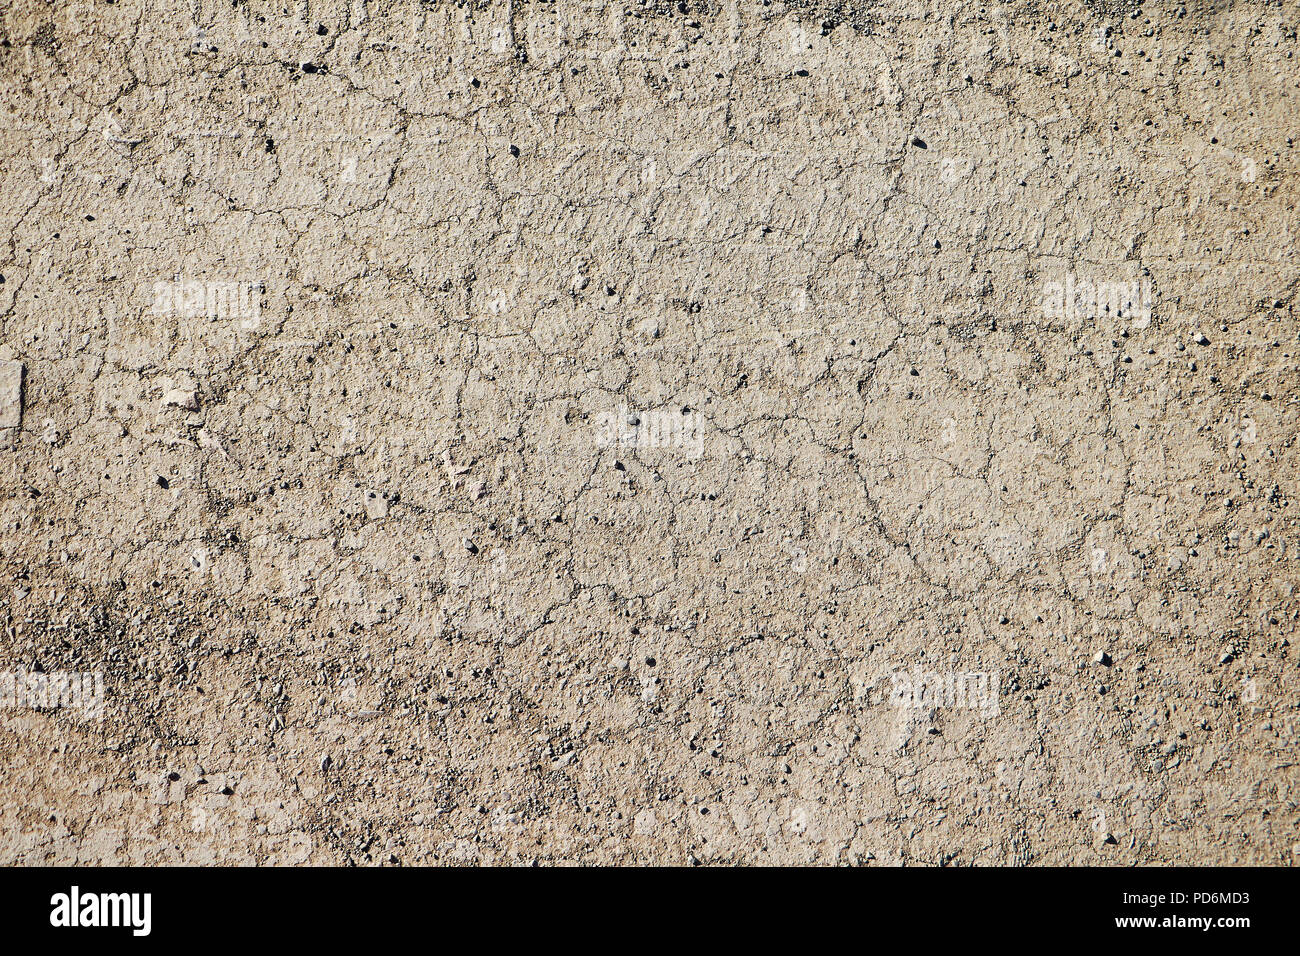 Texture of dry cracked earth. The desert background. The global shortage of water on the planet. Cracks on brown land or soil as a symbol of hot clima Stock Photo